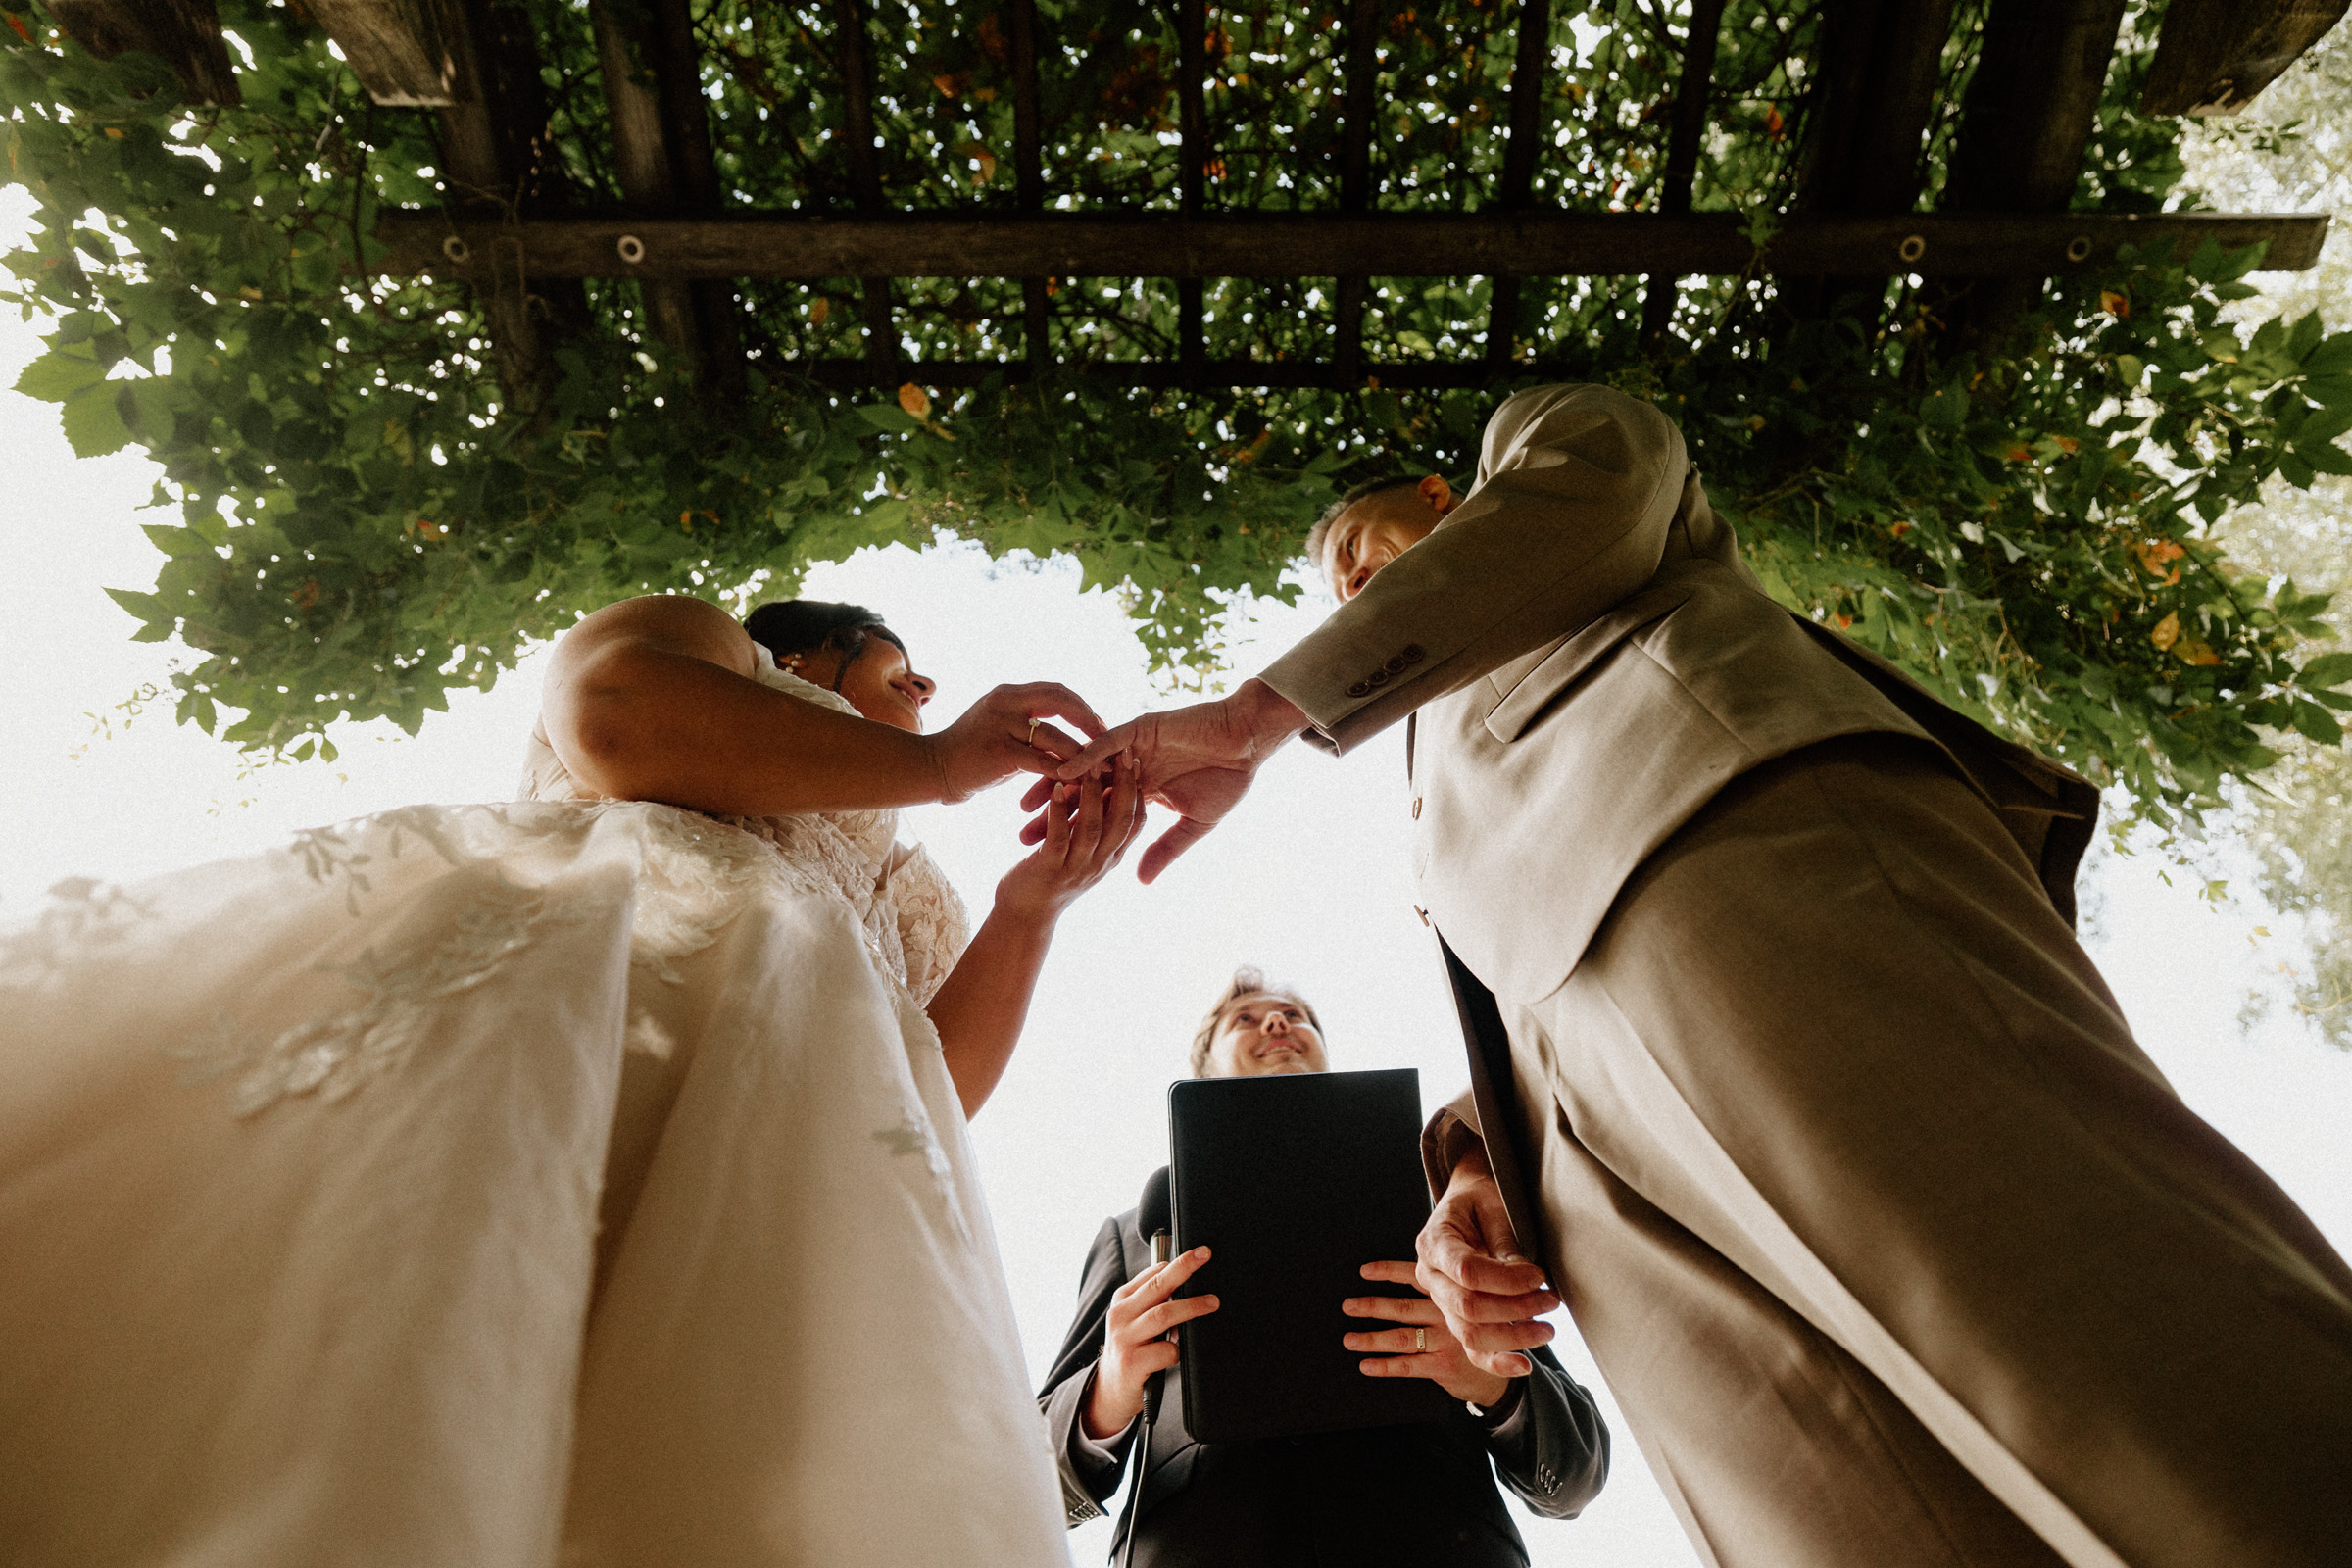 Why hire a wedding planner and day-of coordinator